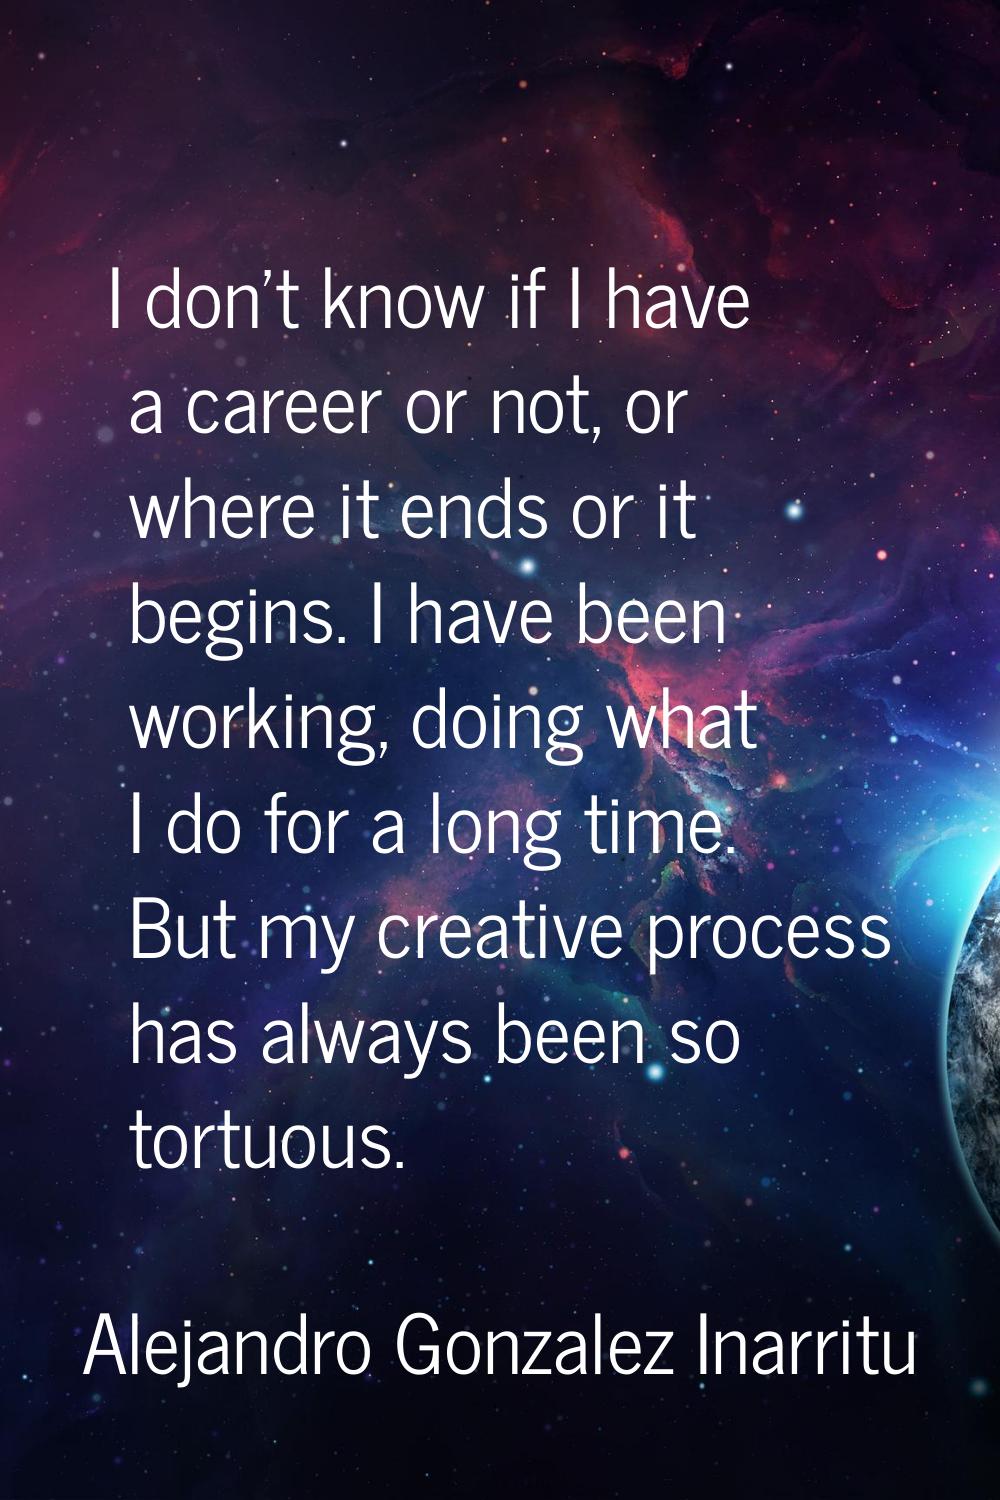 I don't know if I have a career or not, or where it ends or it begins. I have been working, doing w